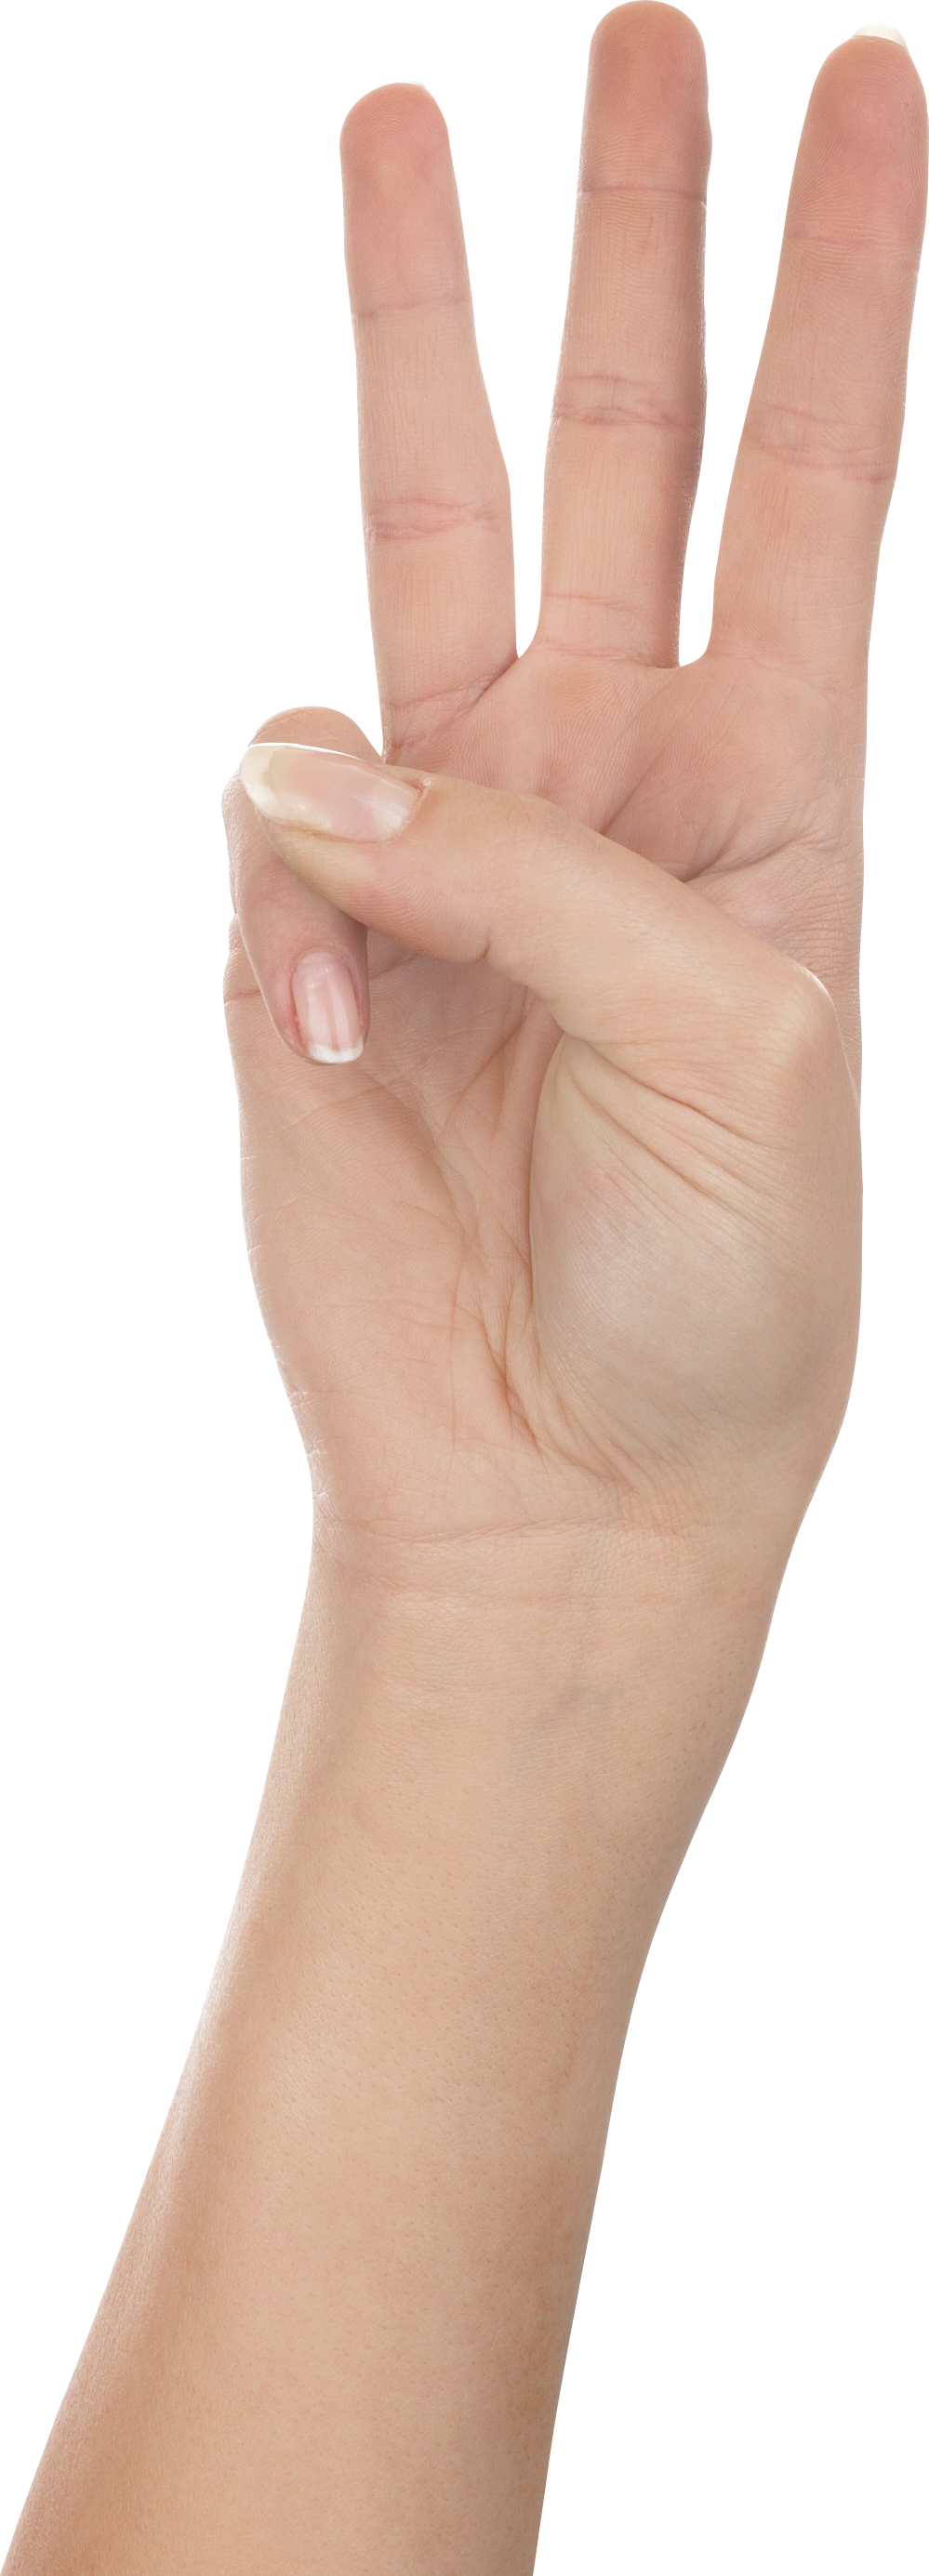 Skin clipart single hand. Hands png free images